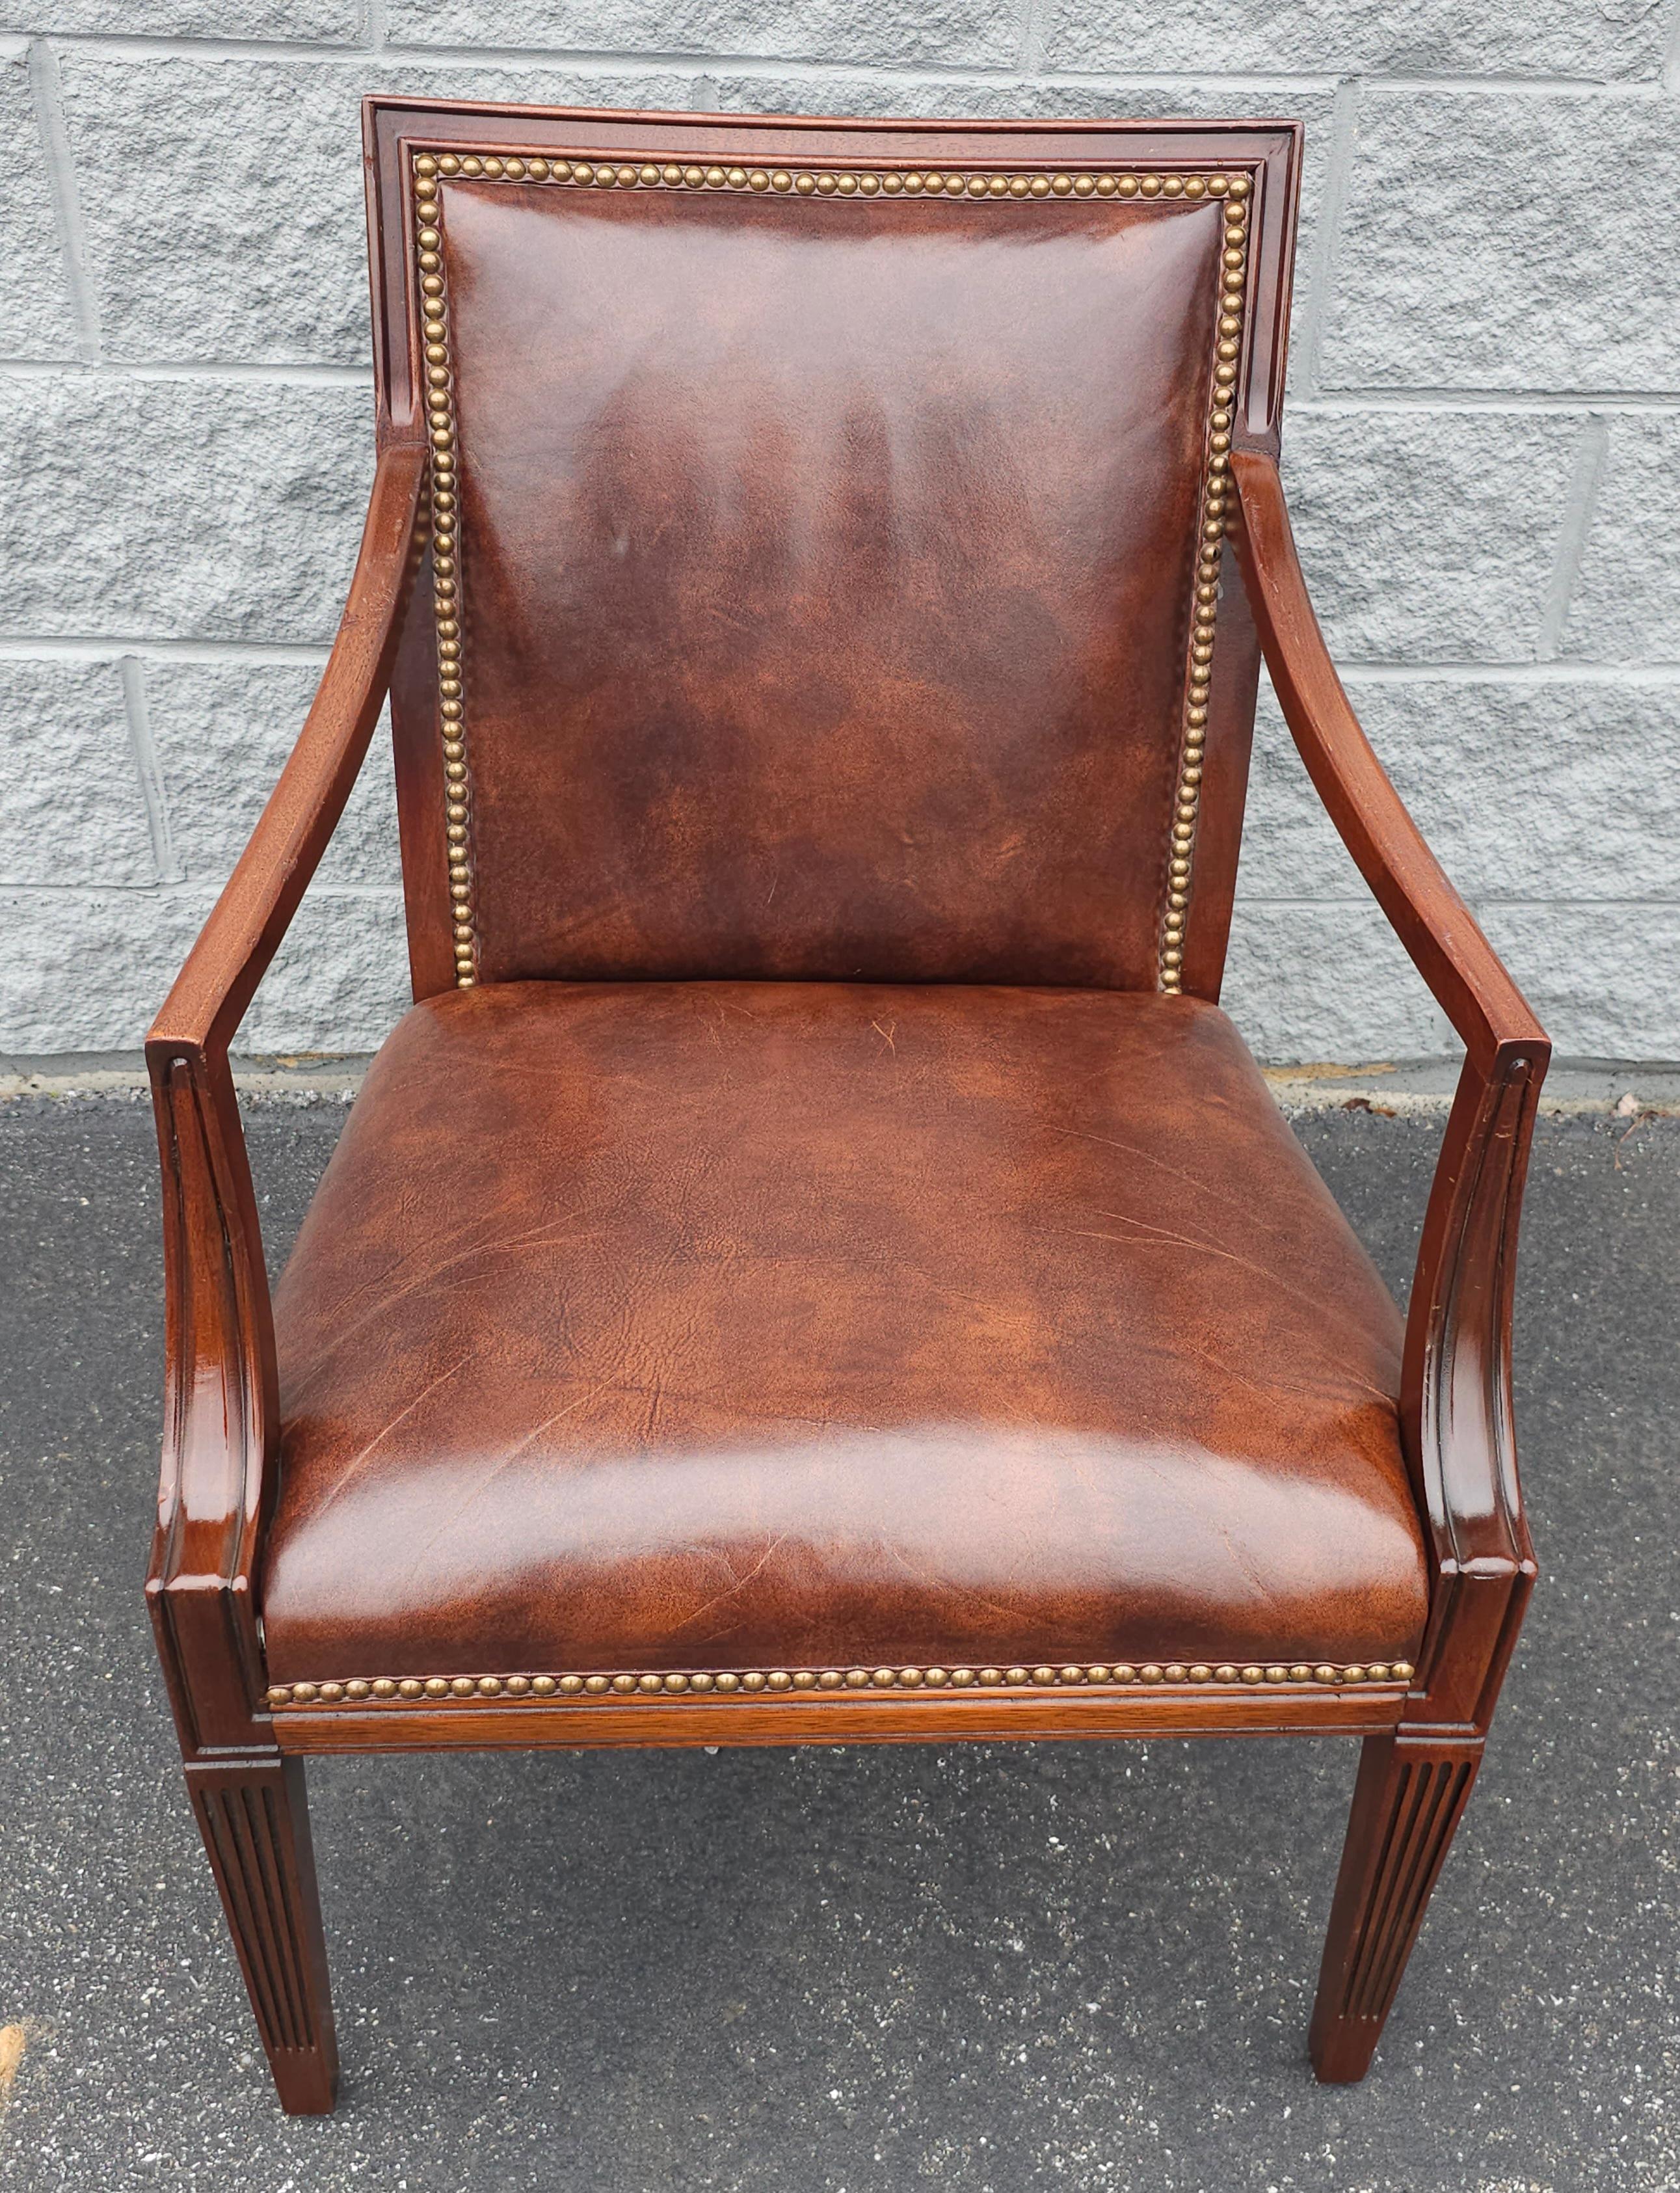 20th Century Stateville Chair Co. Mahogany and Leather Upholstered Armchair  In Good Condition For Sale In Germantown, MD